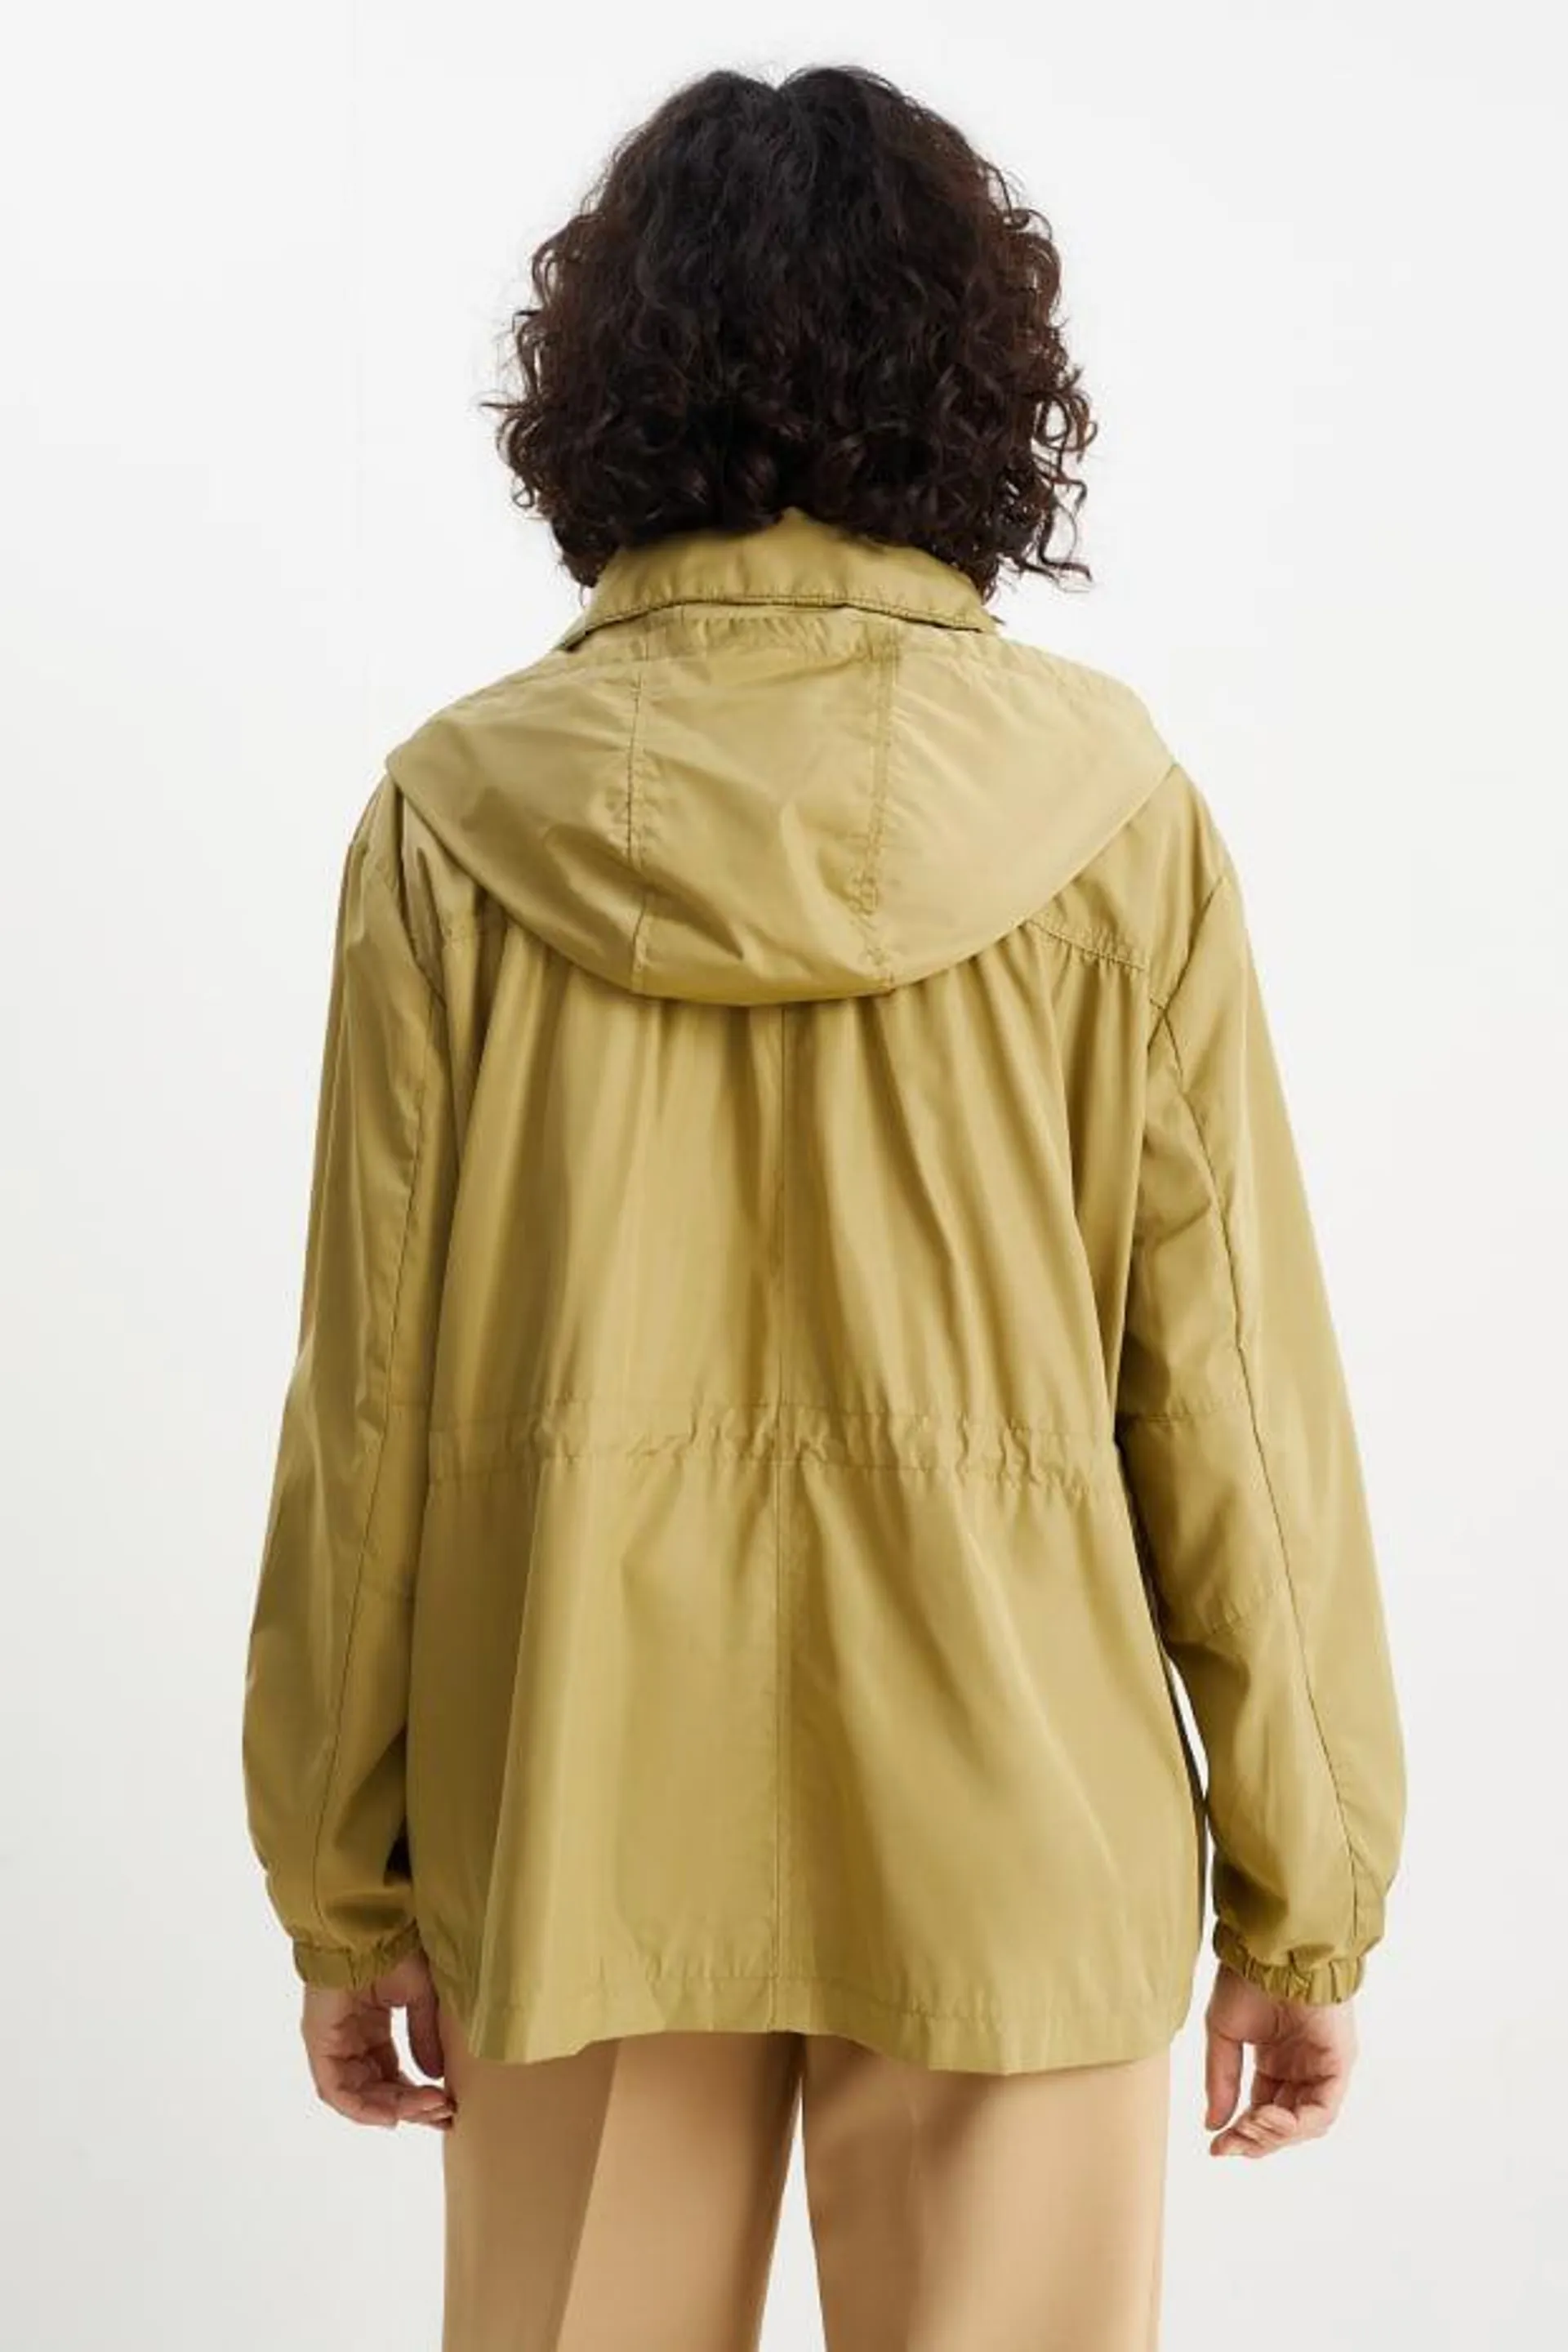 Jacket with hood - lined - water-repellent - foldable